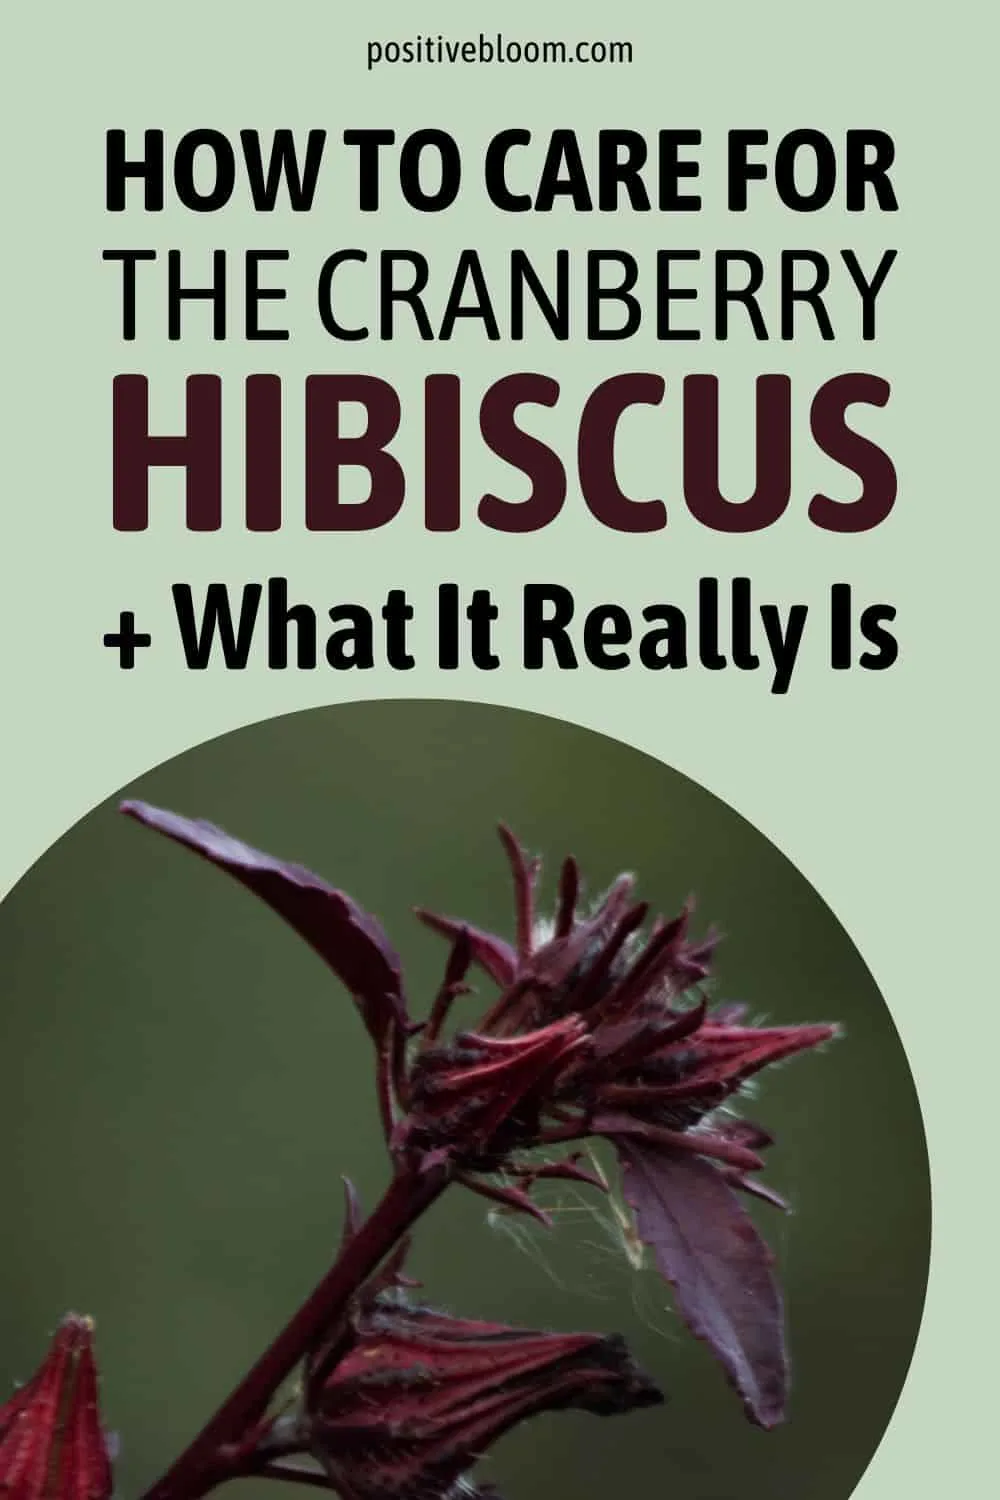 How To Care For The Cranberry Hibiscus + What It Really Is Pinterest